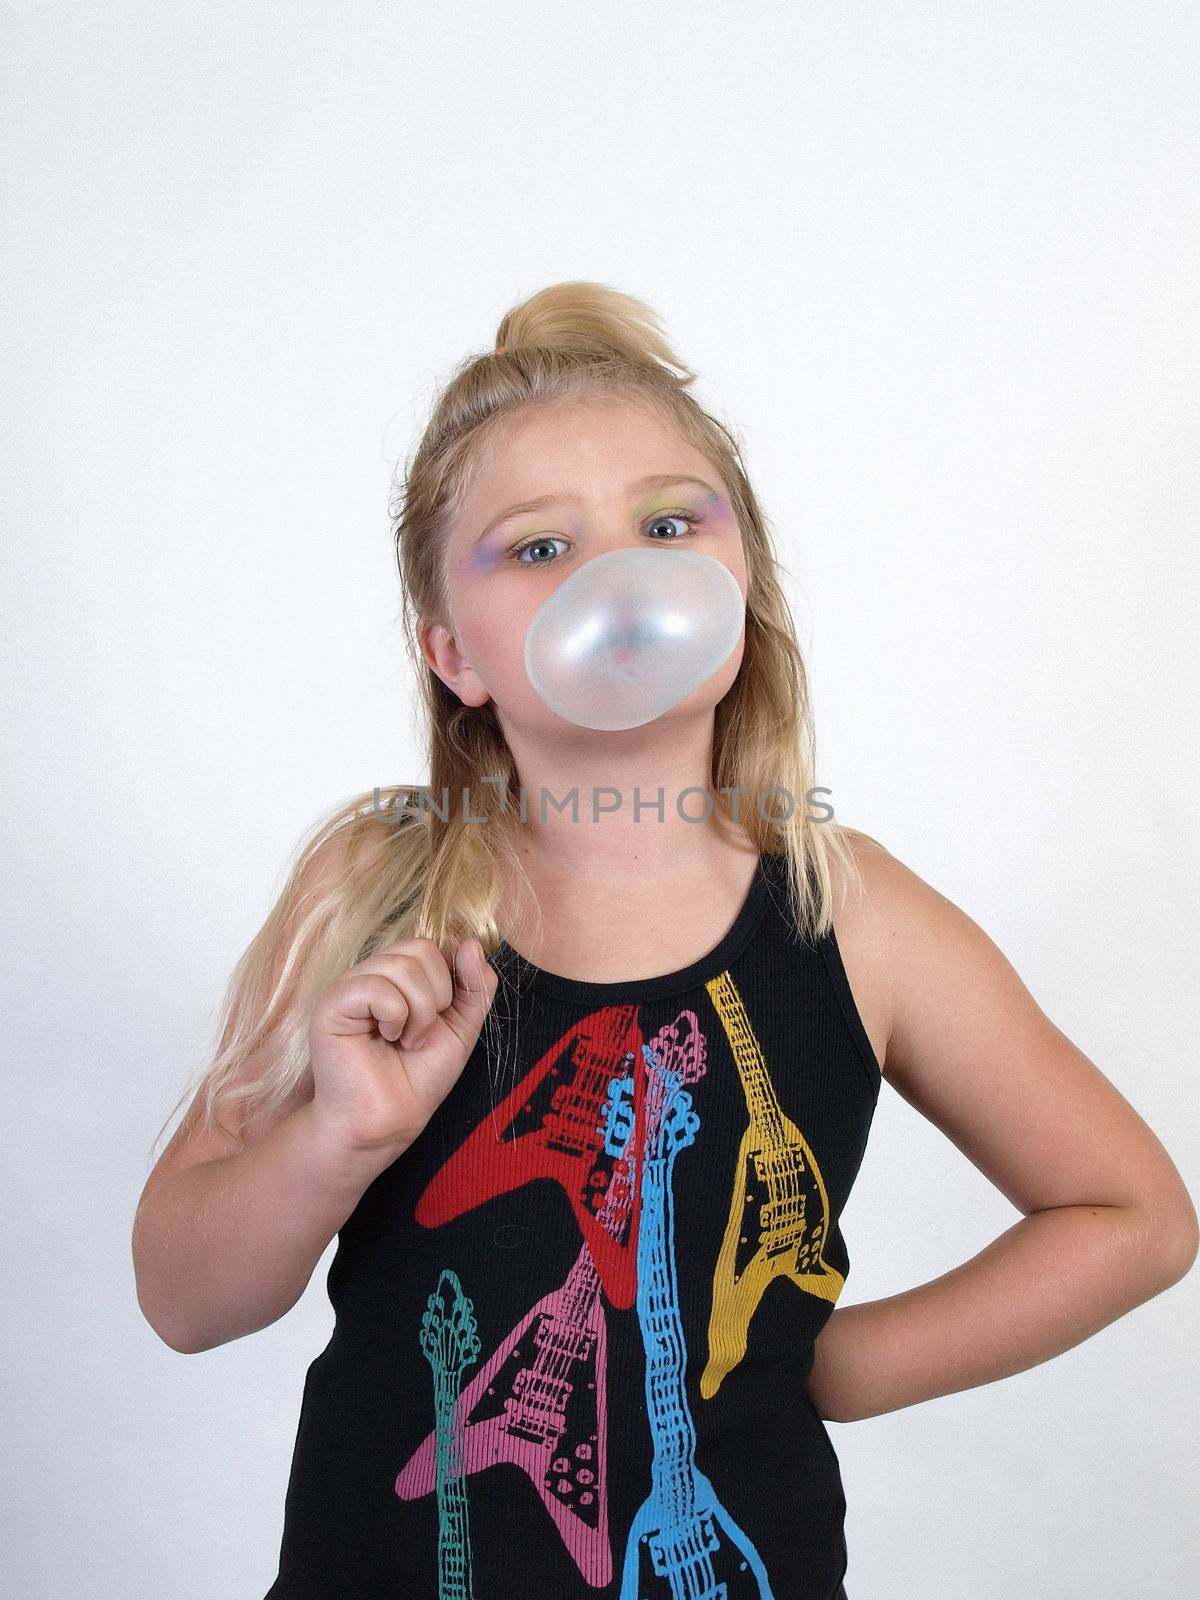 Young Girl Blowing a Bubble by RGebbiePhoto